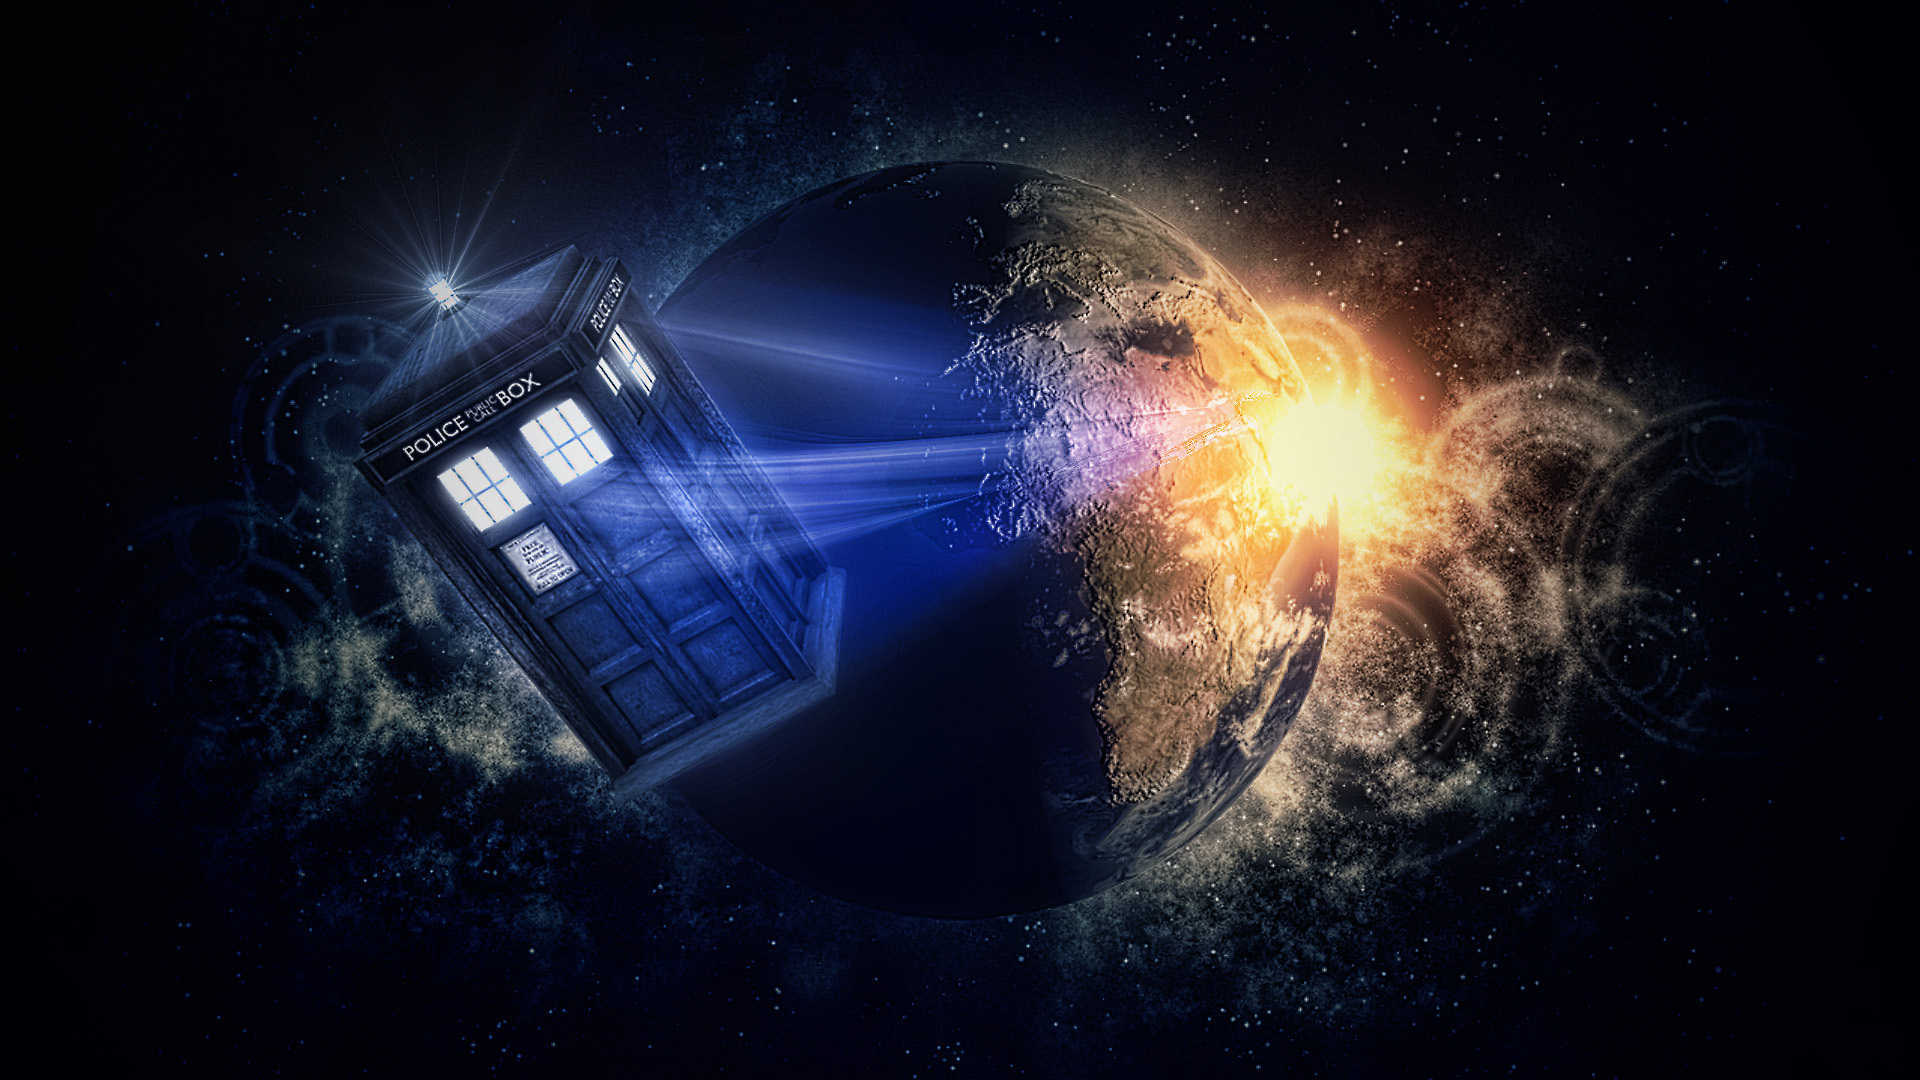 Wallpaper Doctor Who HD Upload At September By